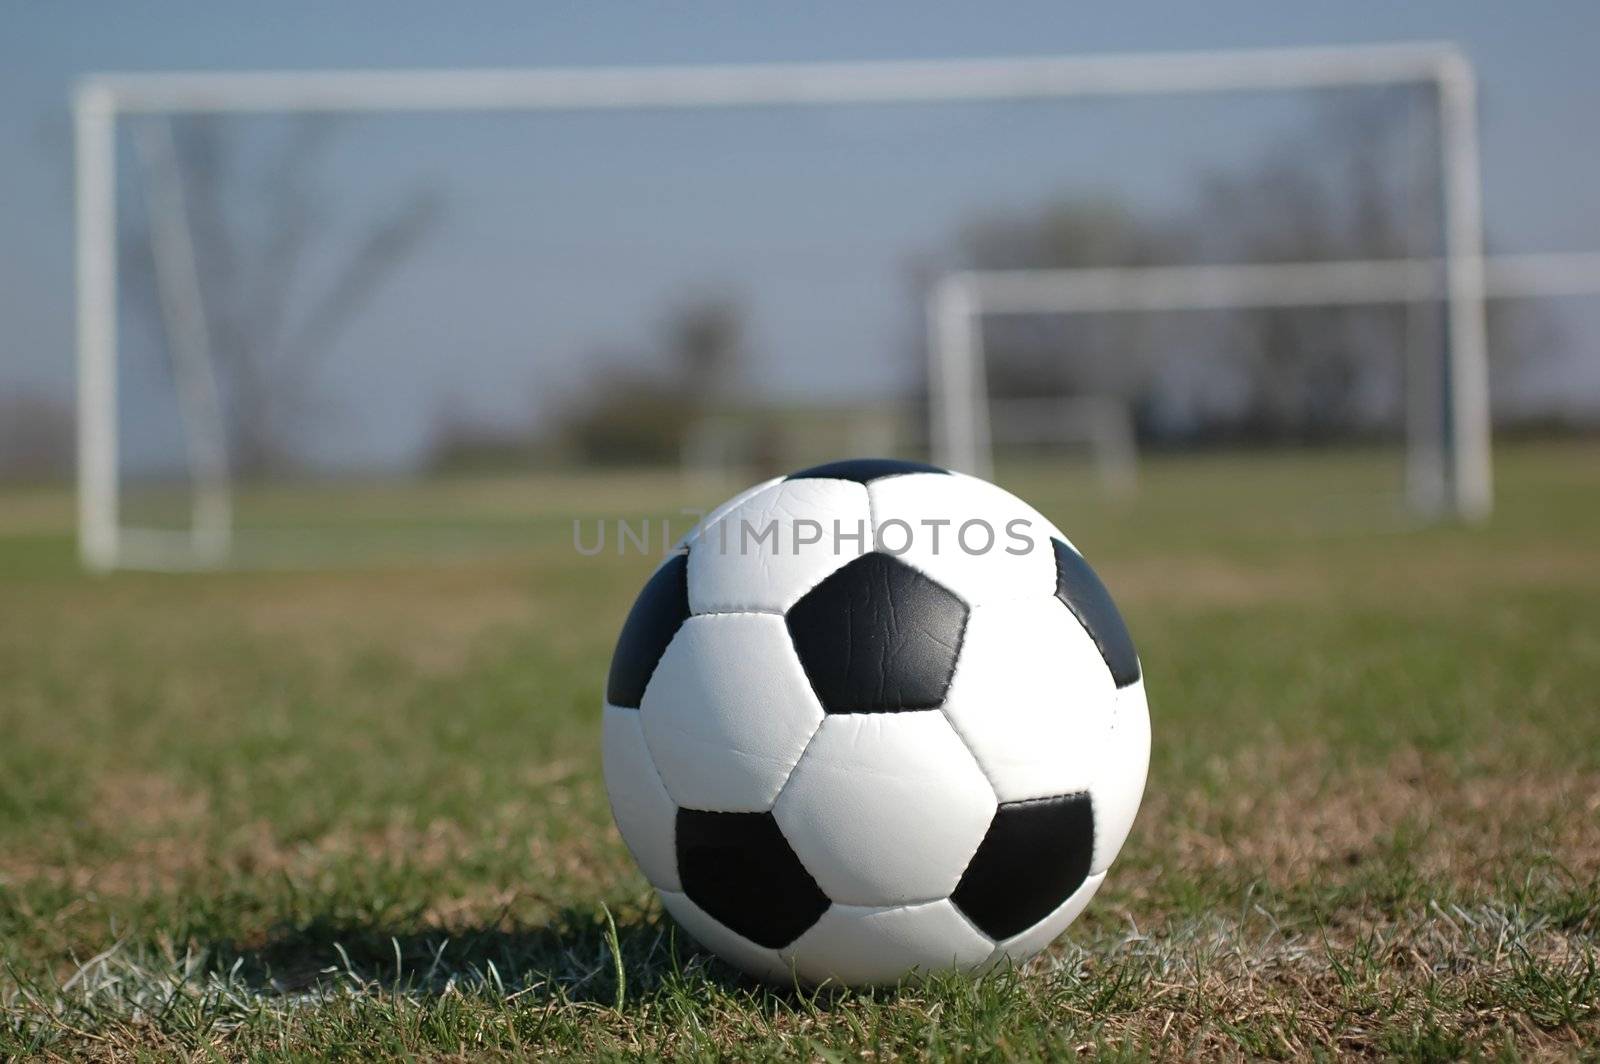 Soccer ball on field with goal in background.